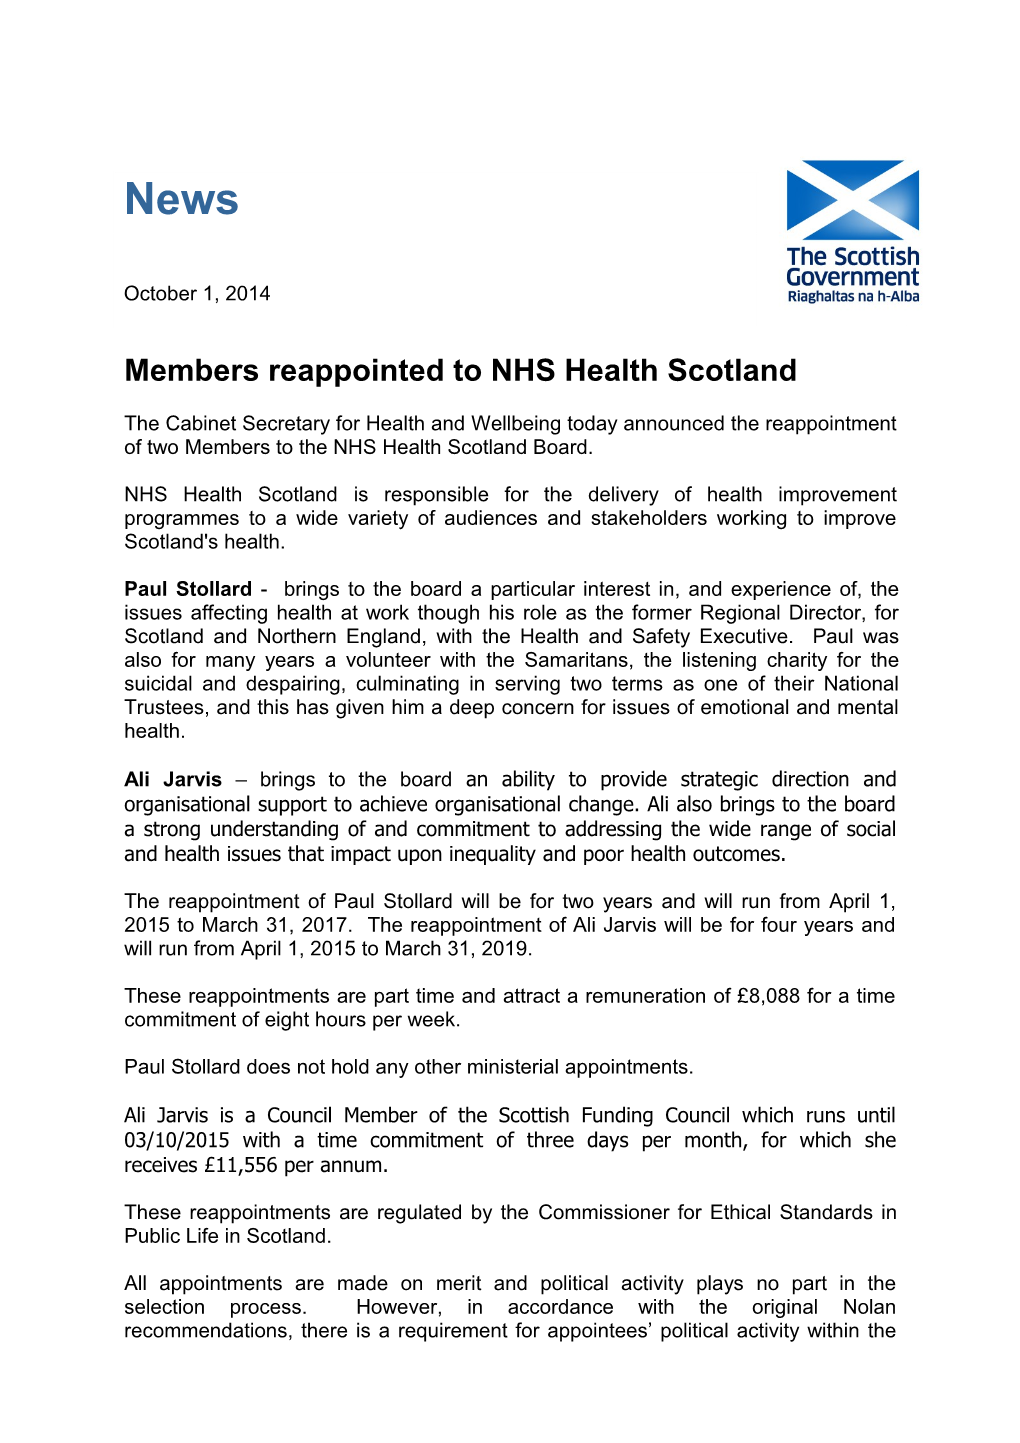 Members Reappointed to NHS Health Scotland